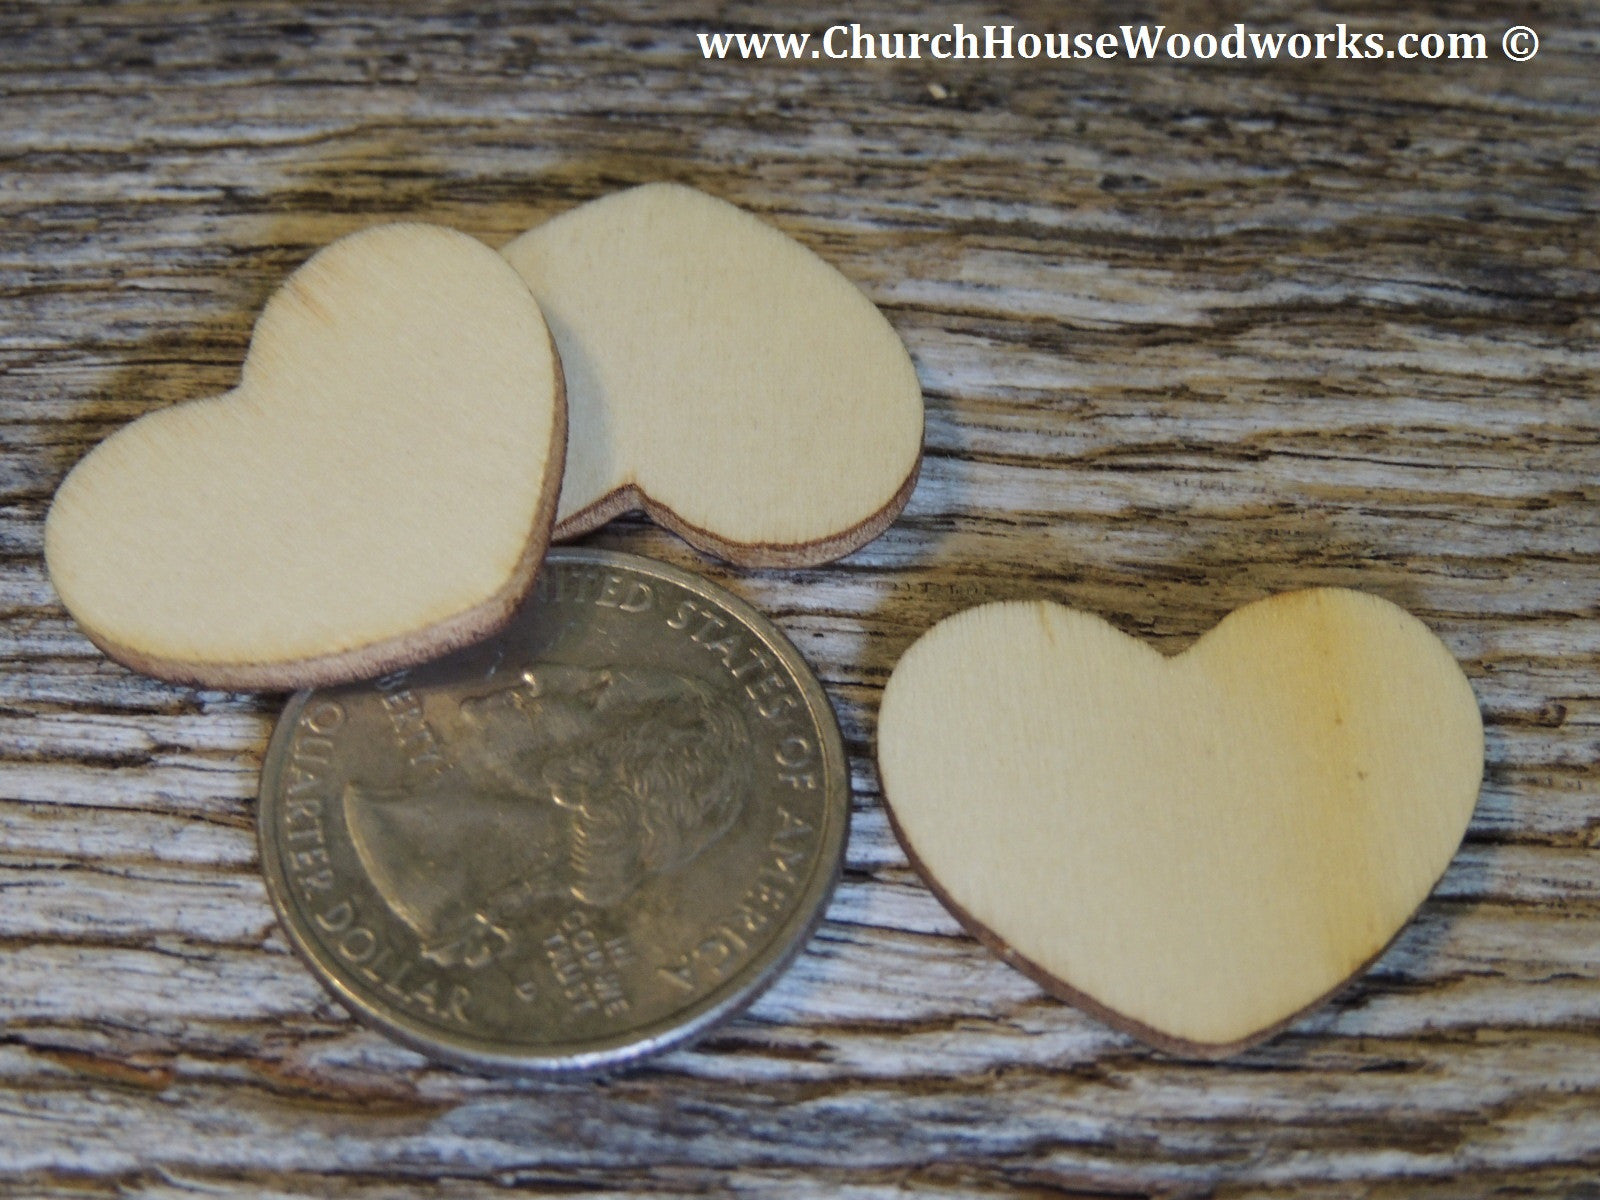 100 Solid Wood Hearts, 1-1/2 Inch Wide, 1/8 Inch Thick - Natural Woode